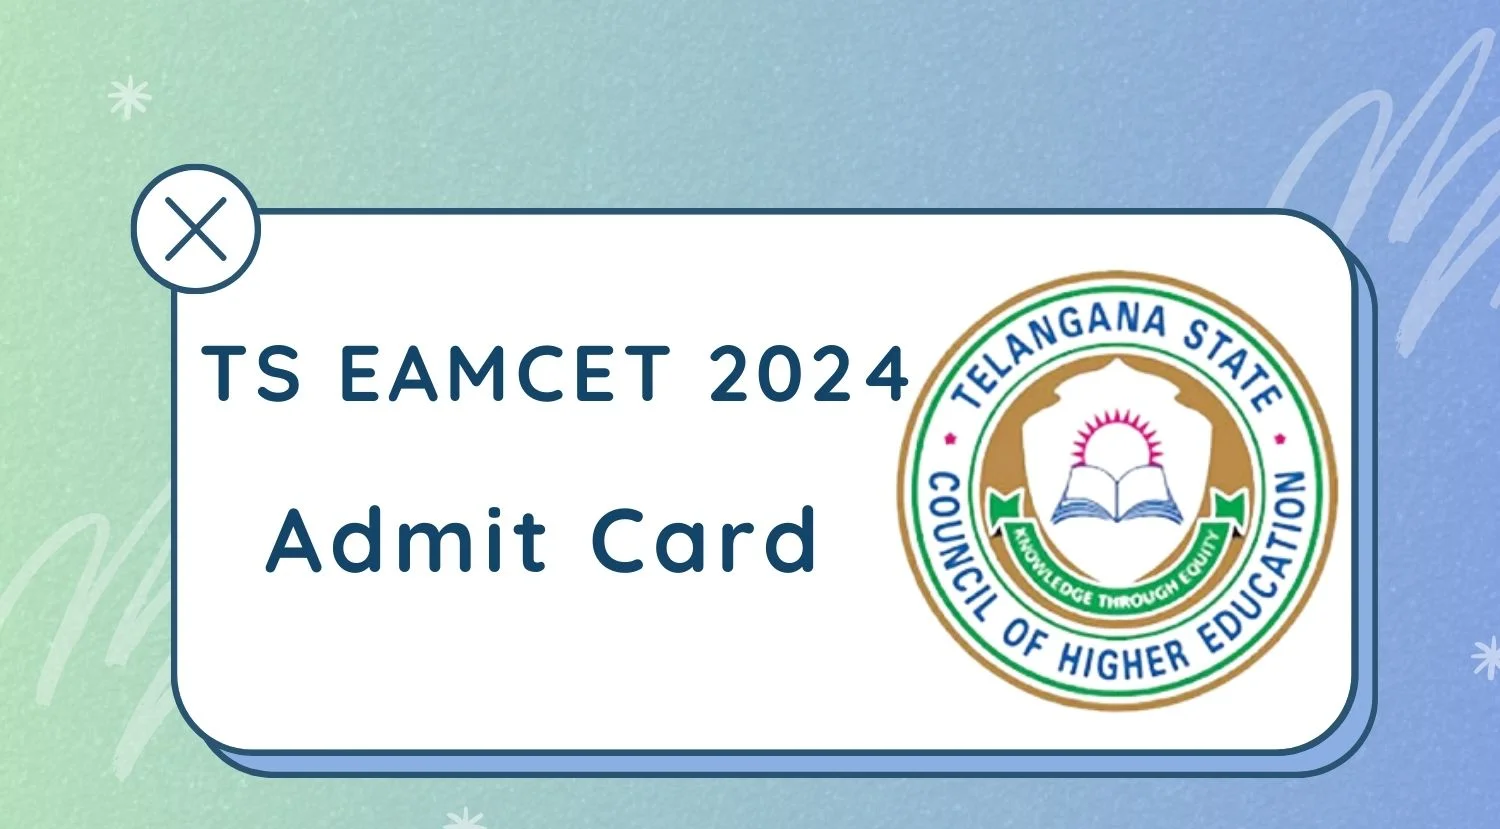 TS EAMCET 2024 Admit Card